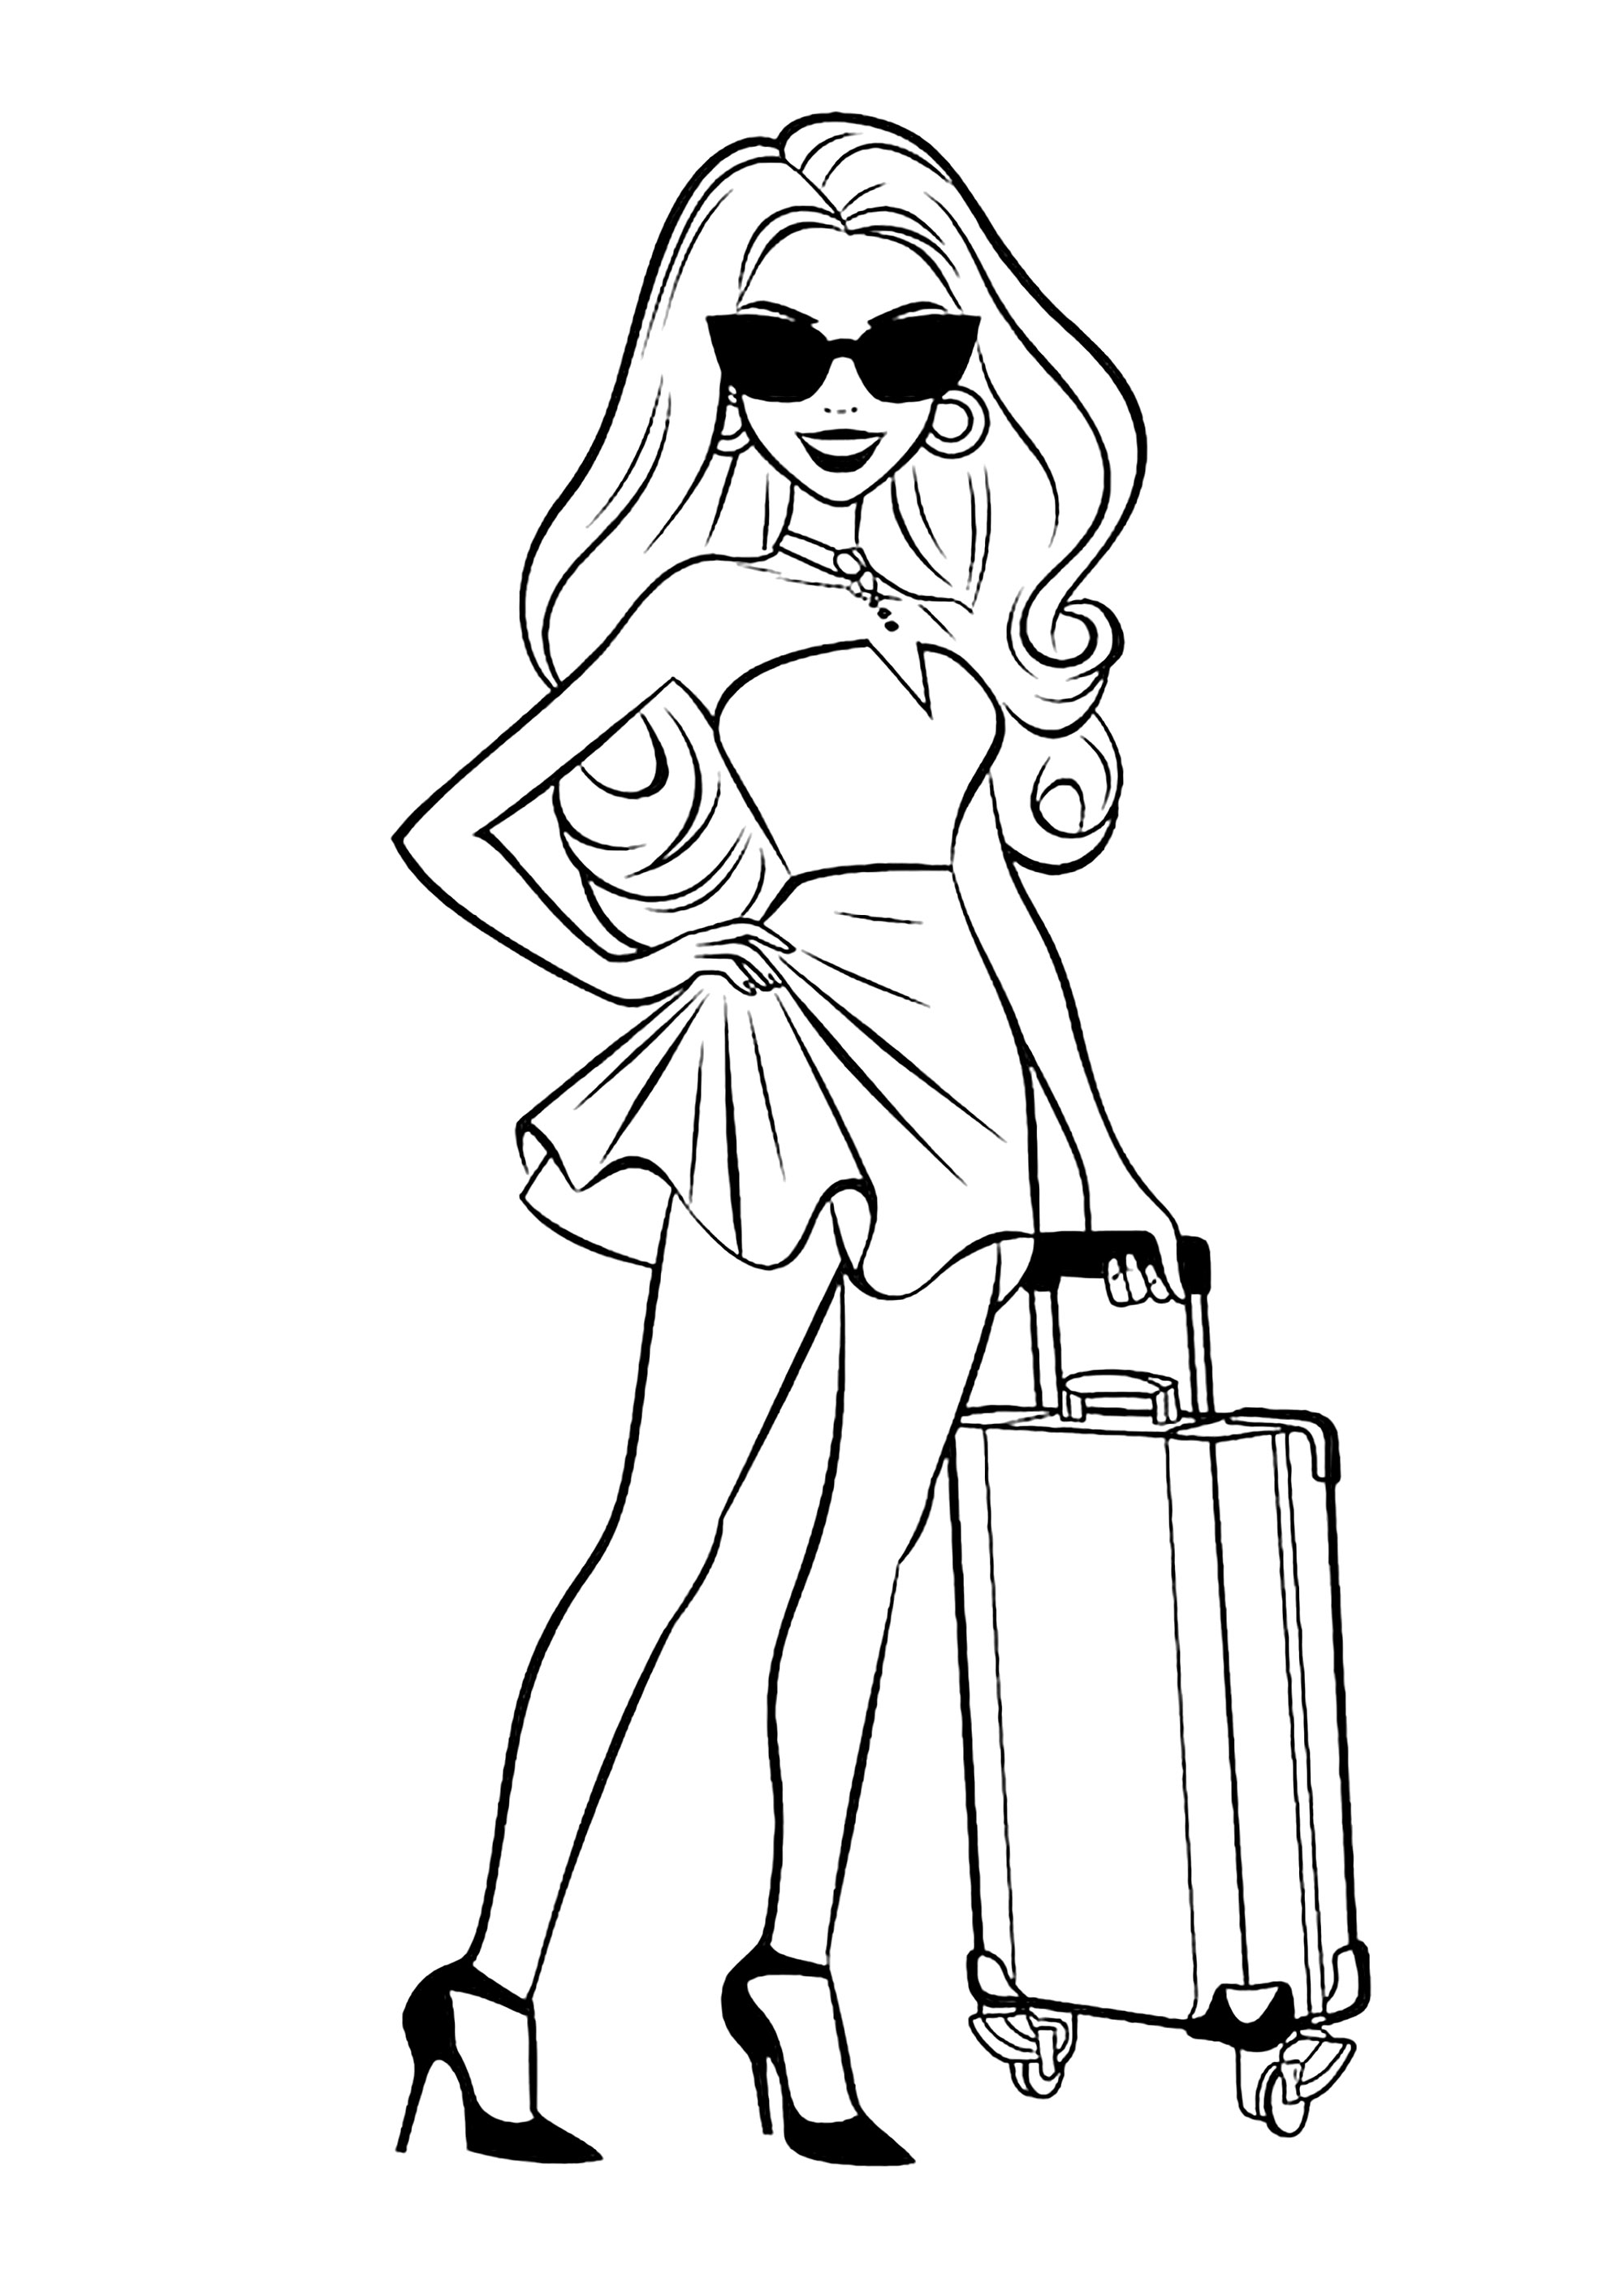 Barbie goes on a trip - Barbie Kids Coloring Pages